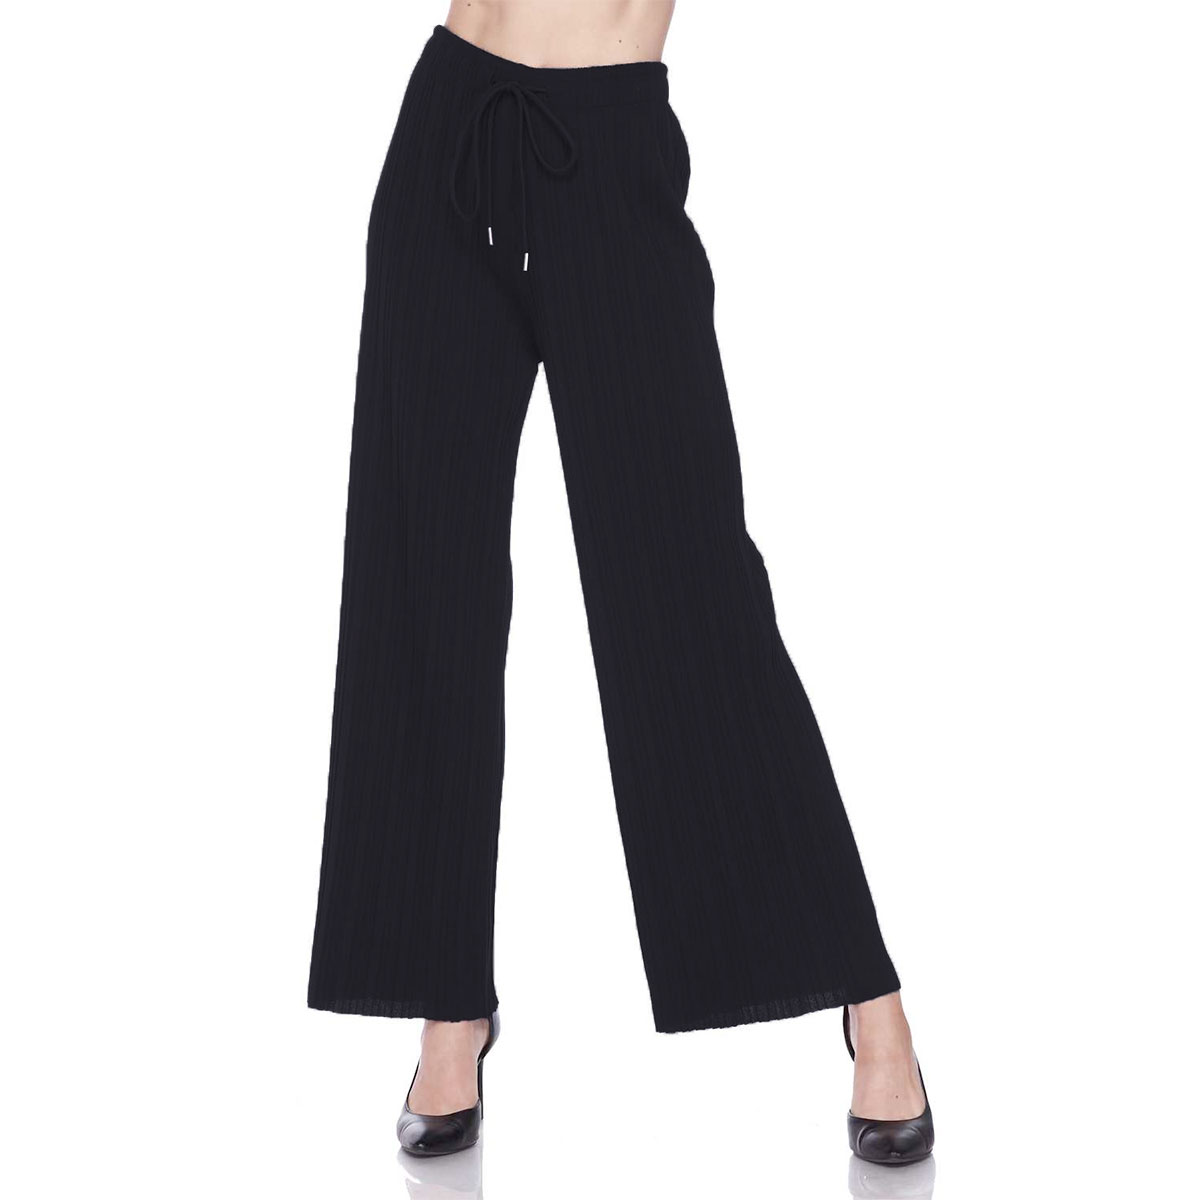 SOLID BLACK Stretch Twill Pleated Wide Leg Pants